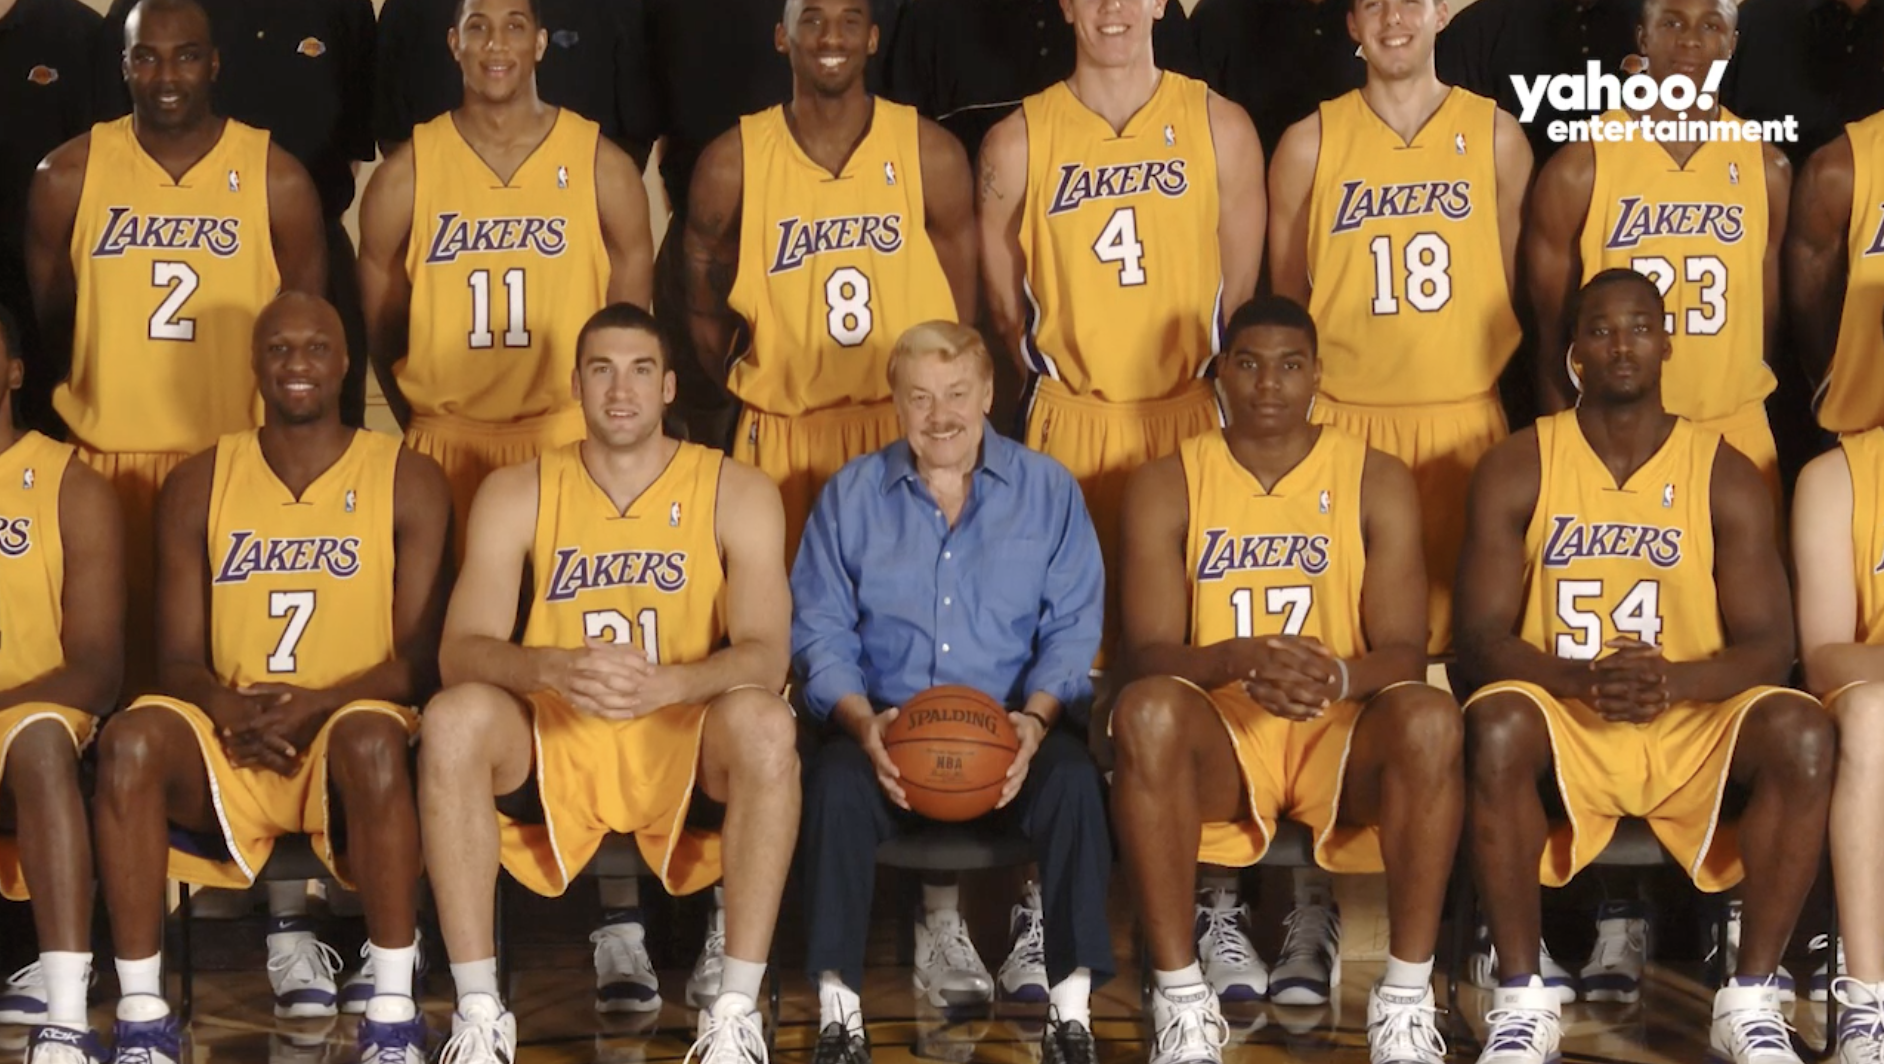 Power Ranking the Casting Decisions for HBO's Showtime Lakers